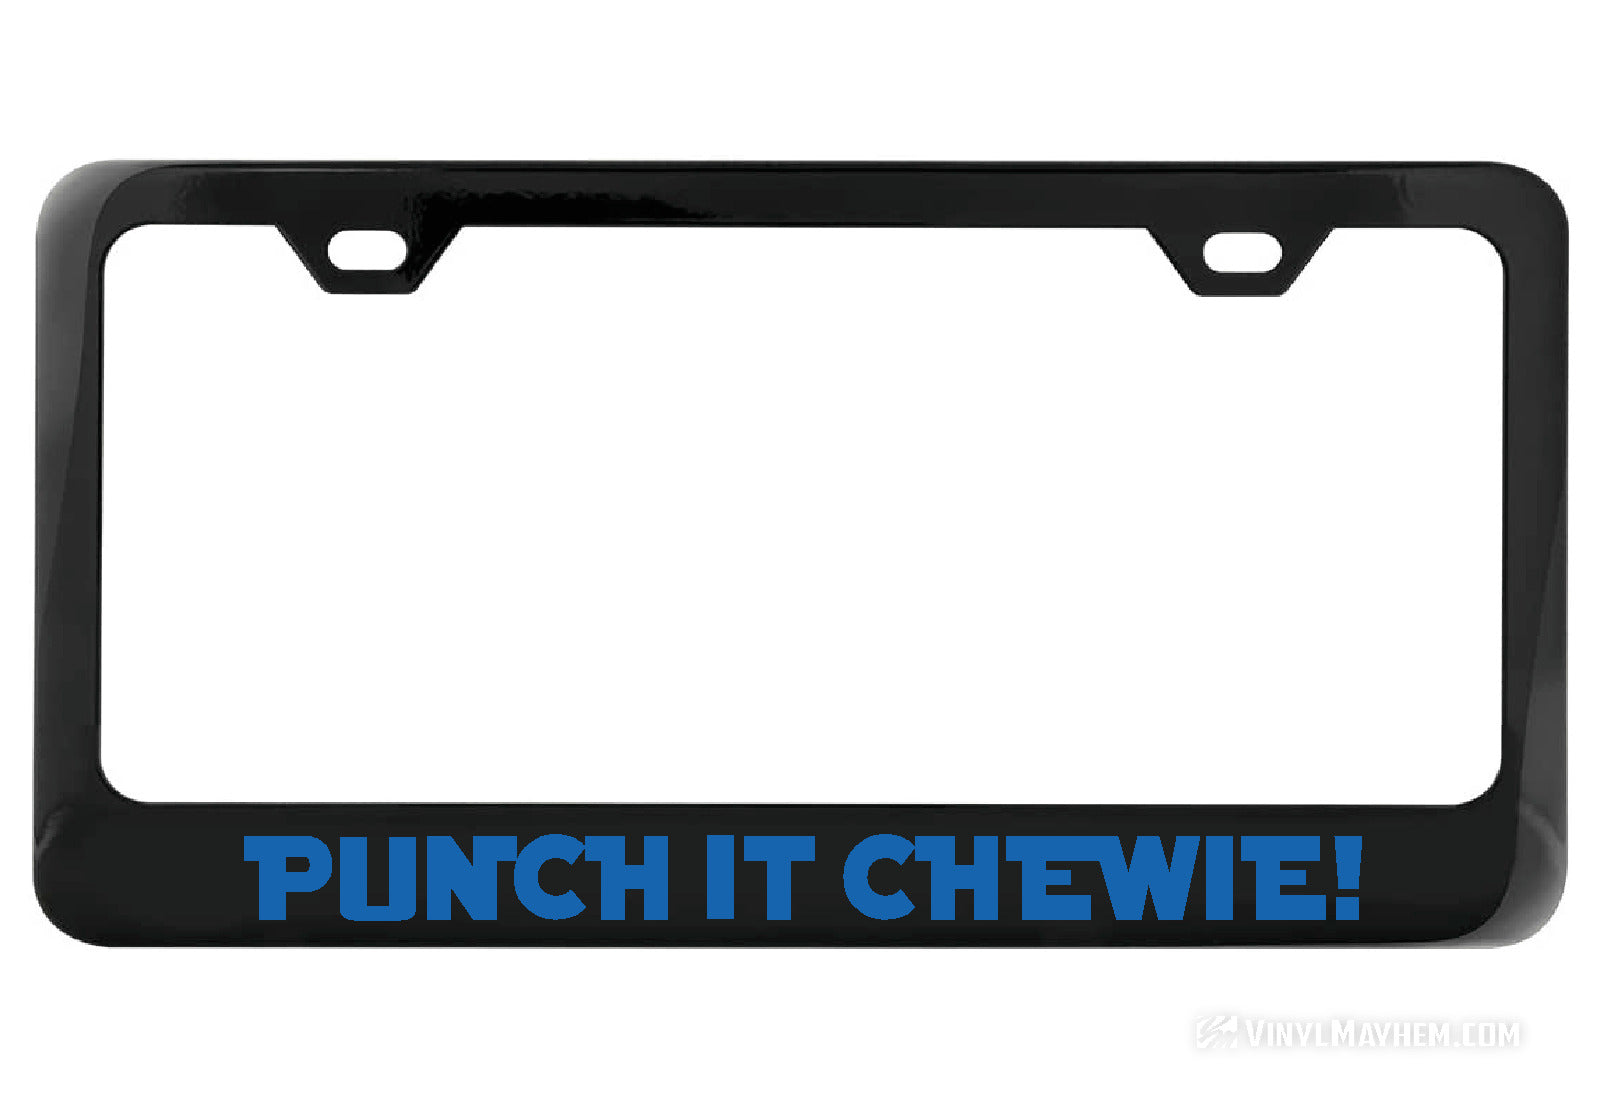 Punch It Chewie! black license plate frame